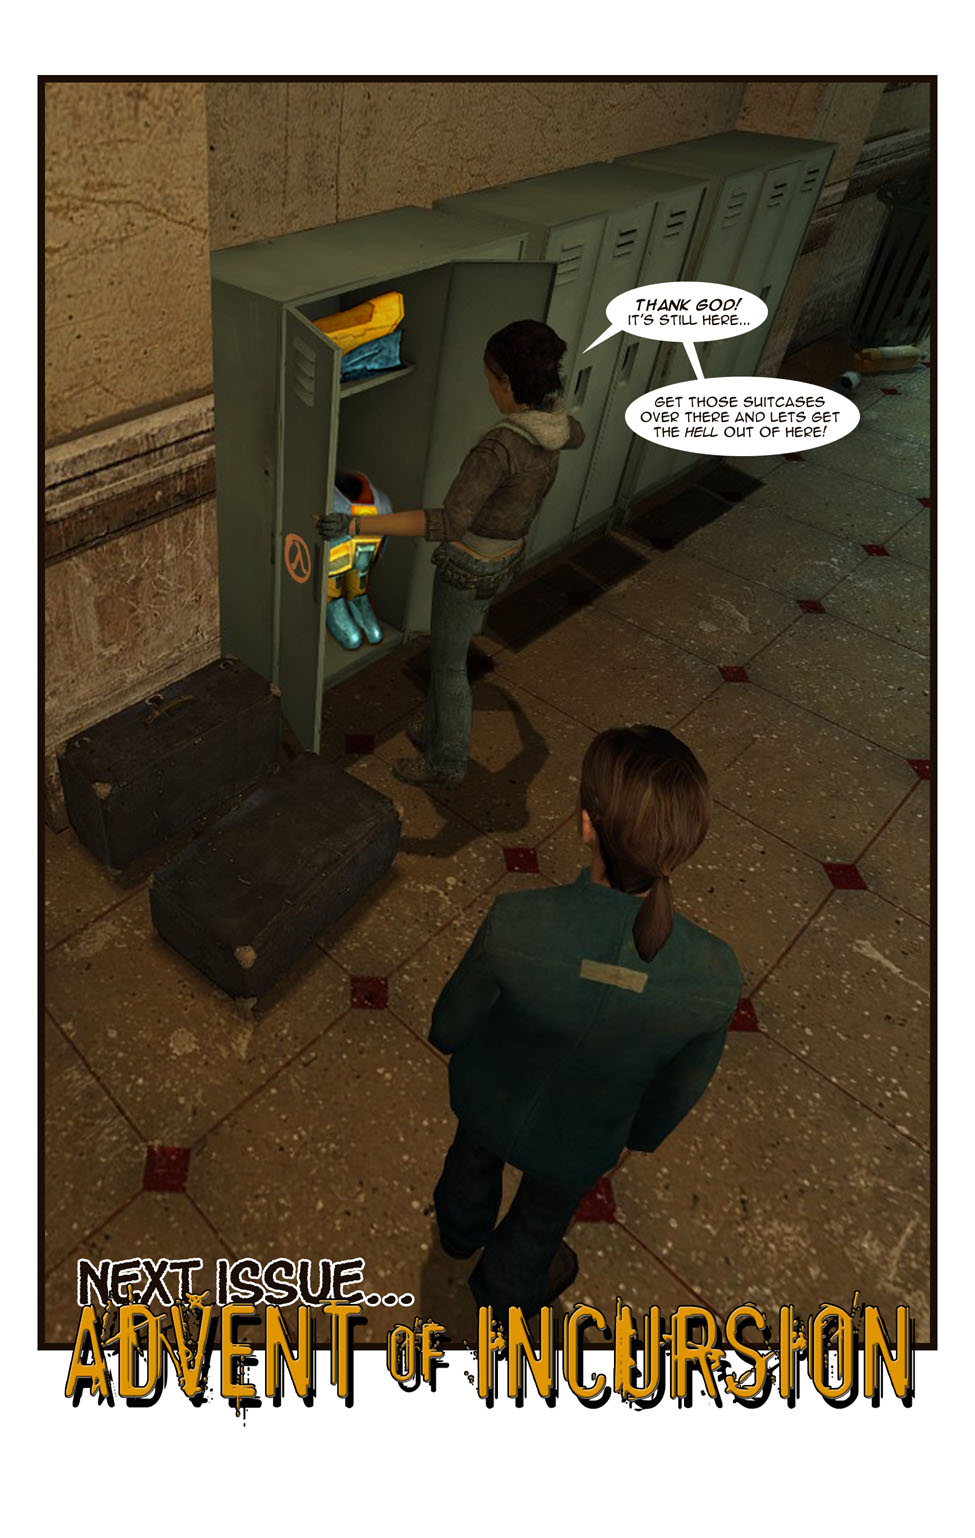 Inside the locker are pieces of a grey and orange suit. It's the Hazardous Environment suit of Doctor Gordon Freeman, the icon of the Resistance. Alyx thanks God that the suit is still there and asks Galena for help putting it into suitcases. The issue ends. Next issue: Advent of Incursion.